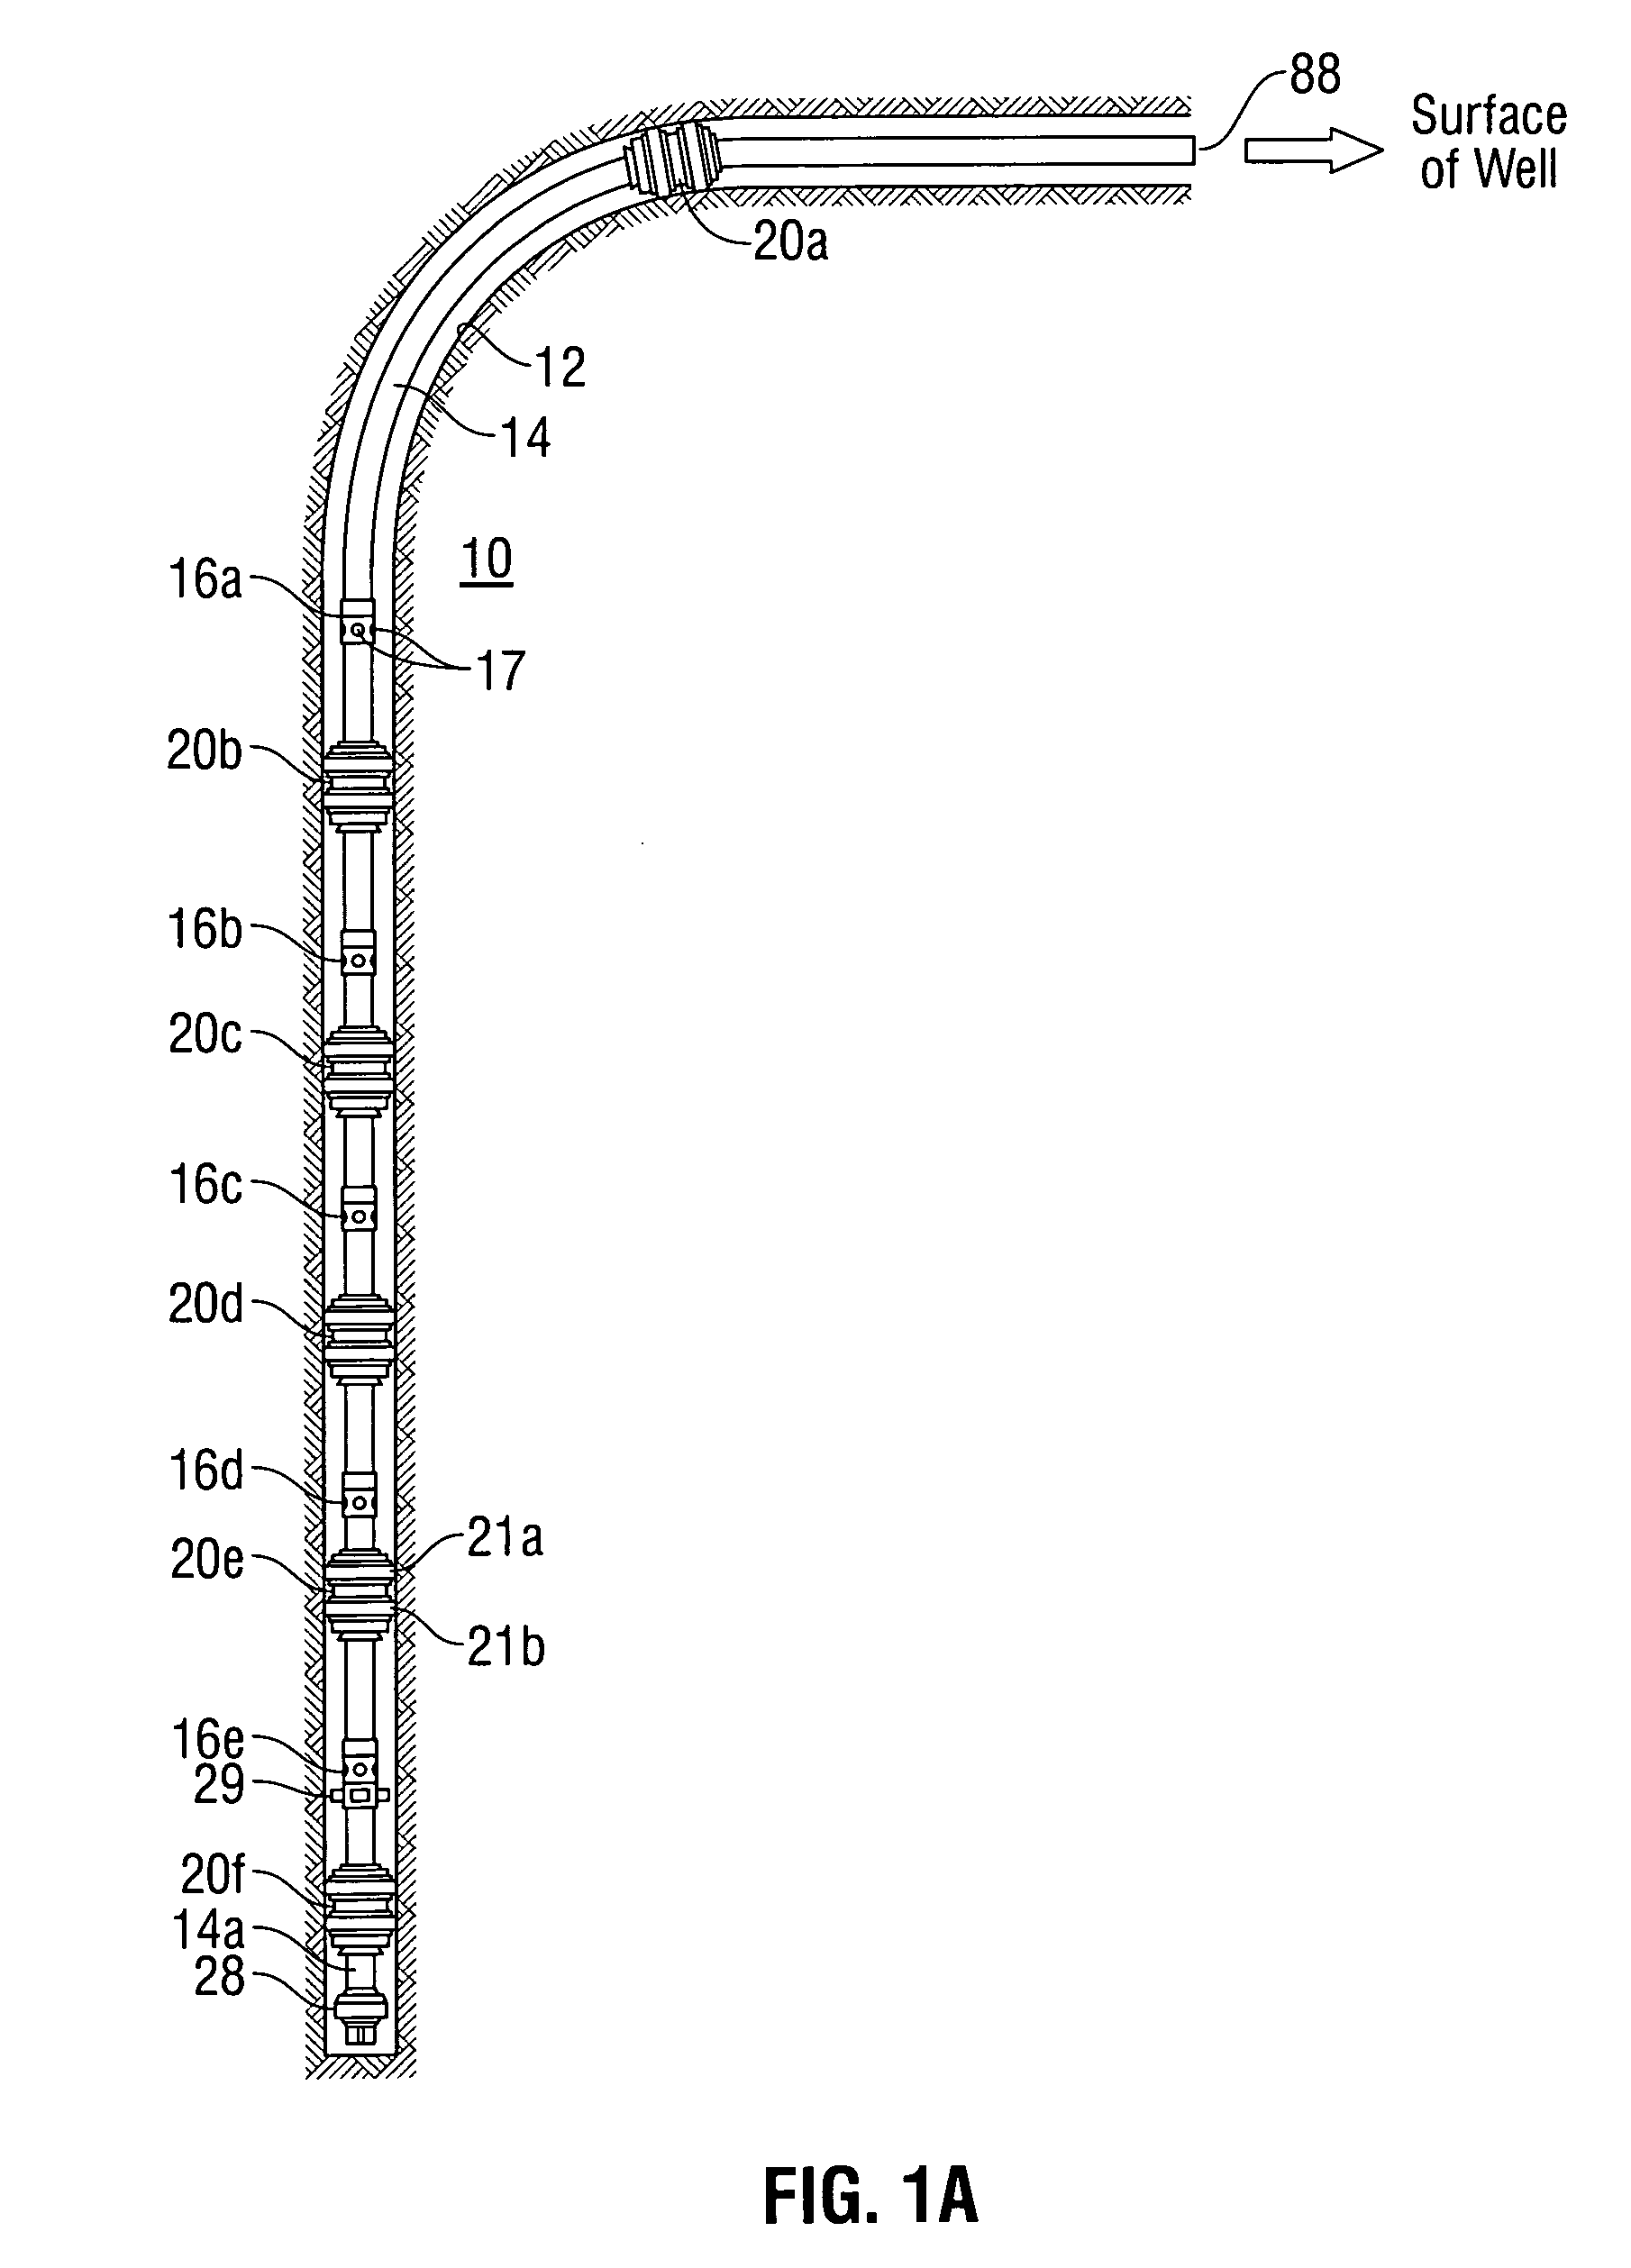 Ball catcher apparatus for use in fracturing of formations surrounding horizontal oil and gas wells, and method for using same